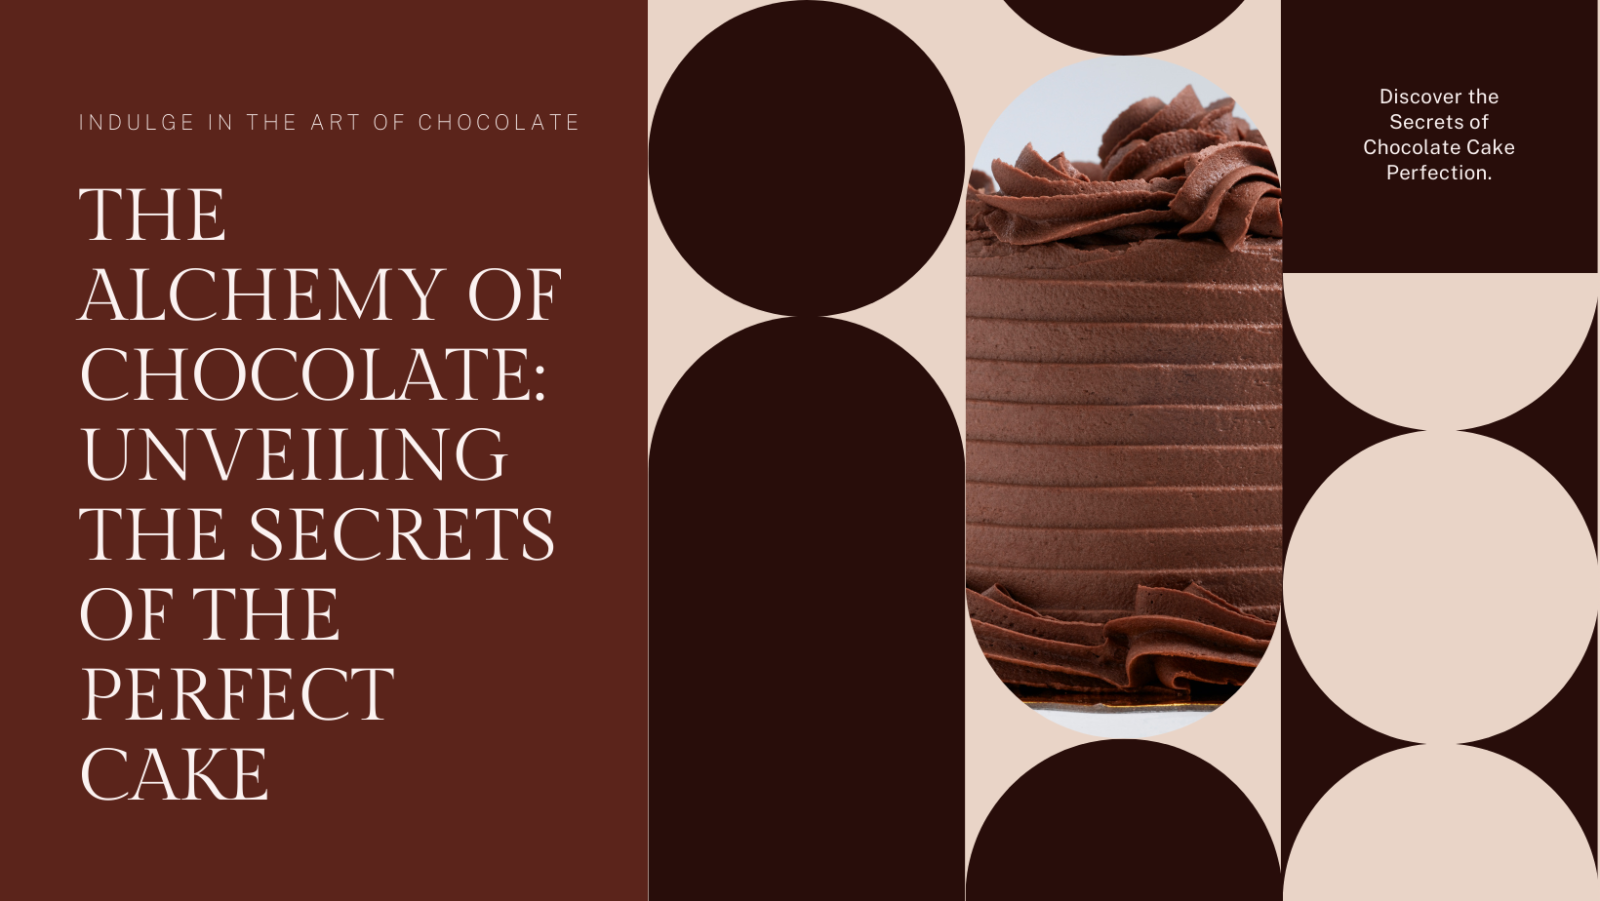 The Alchemy of Chocolate: Unveiling the Secrets of the Perfect Cake